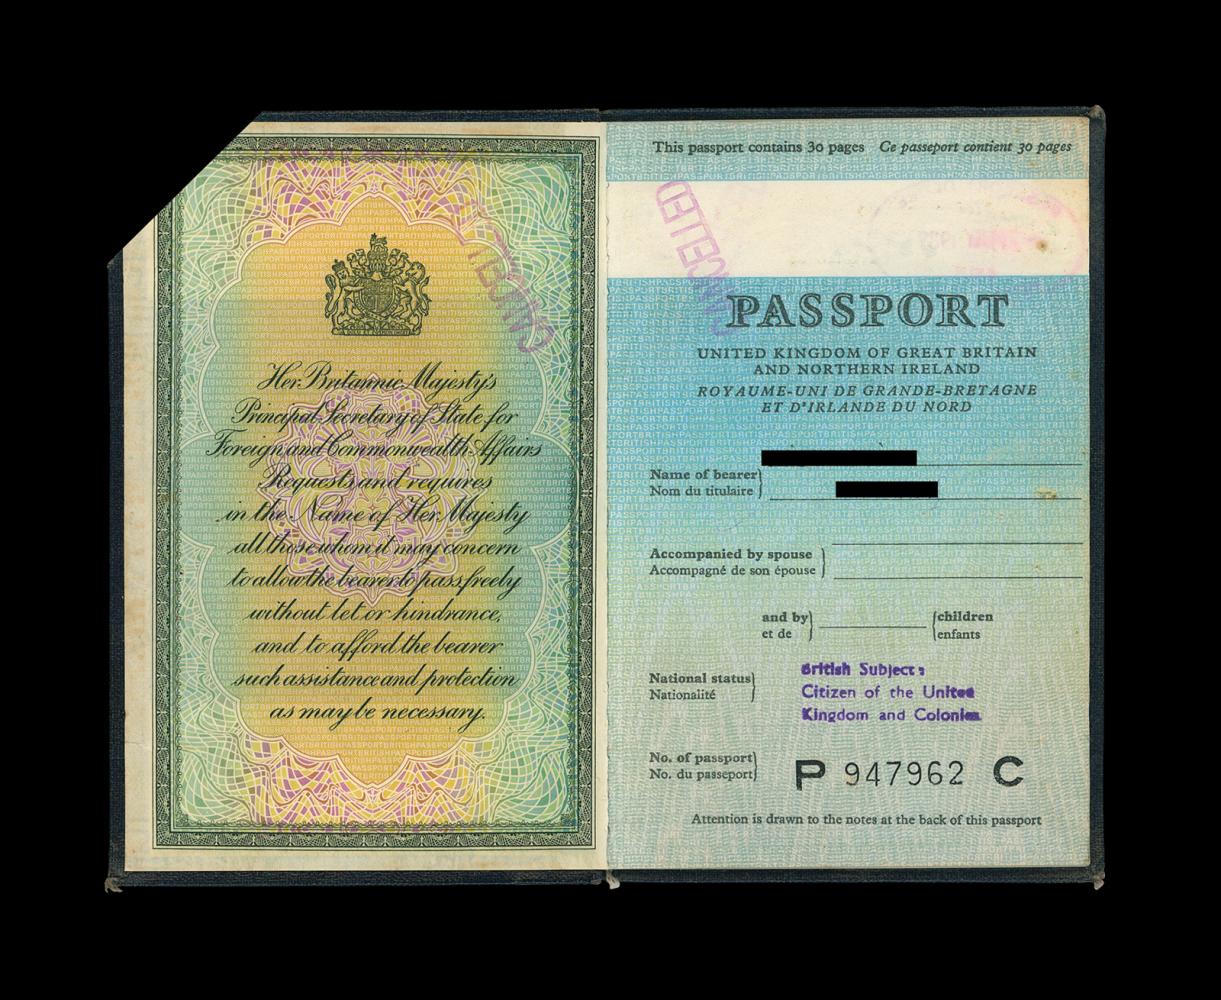 An old British passport. After ...he United Kingdom and Colonies.